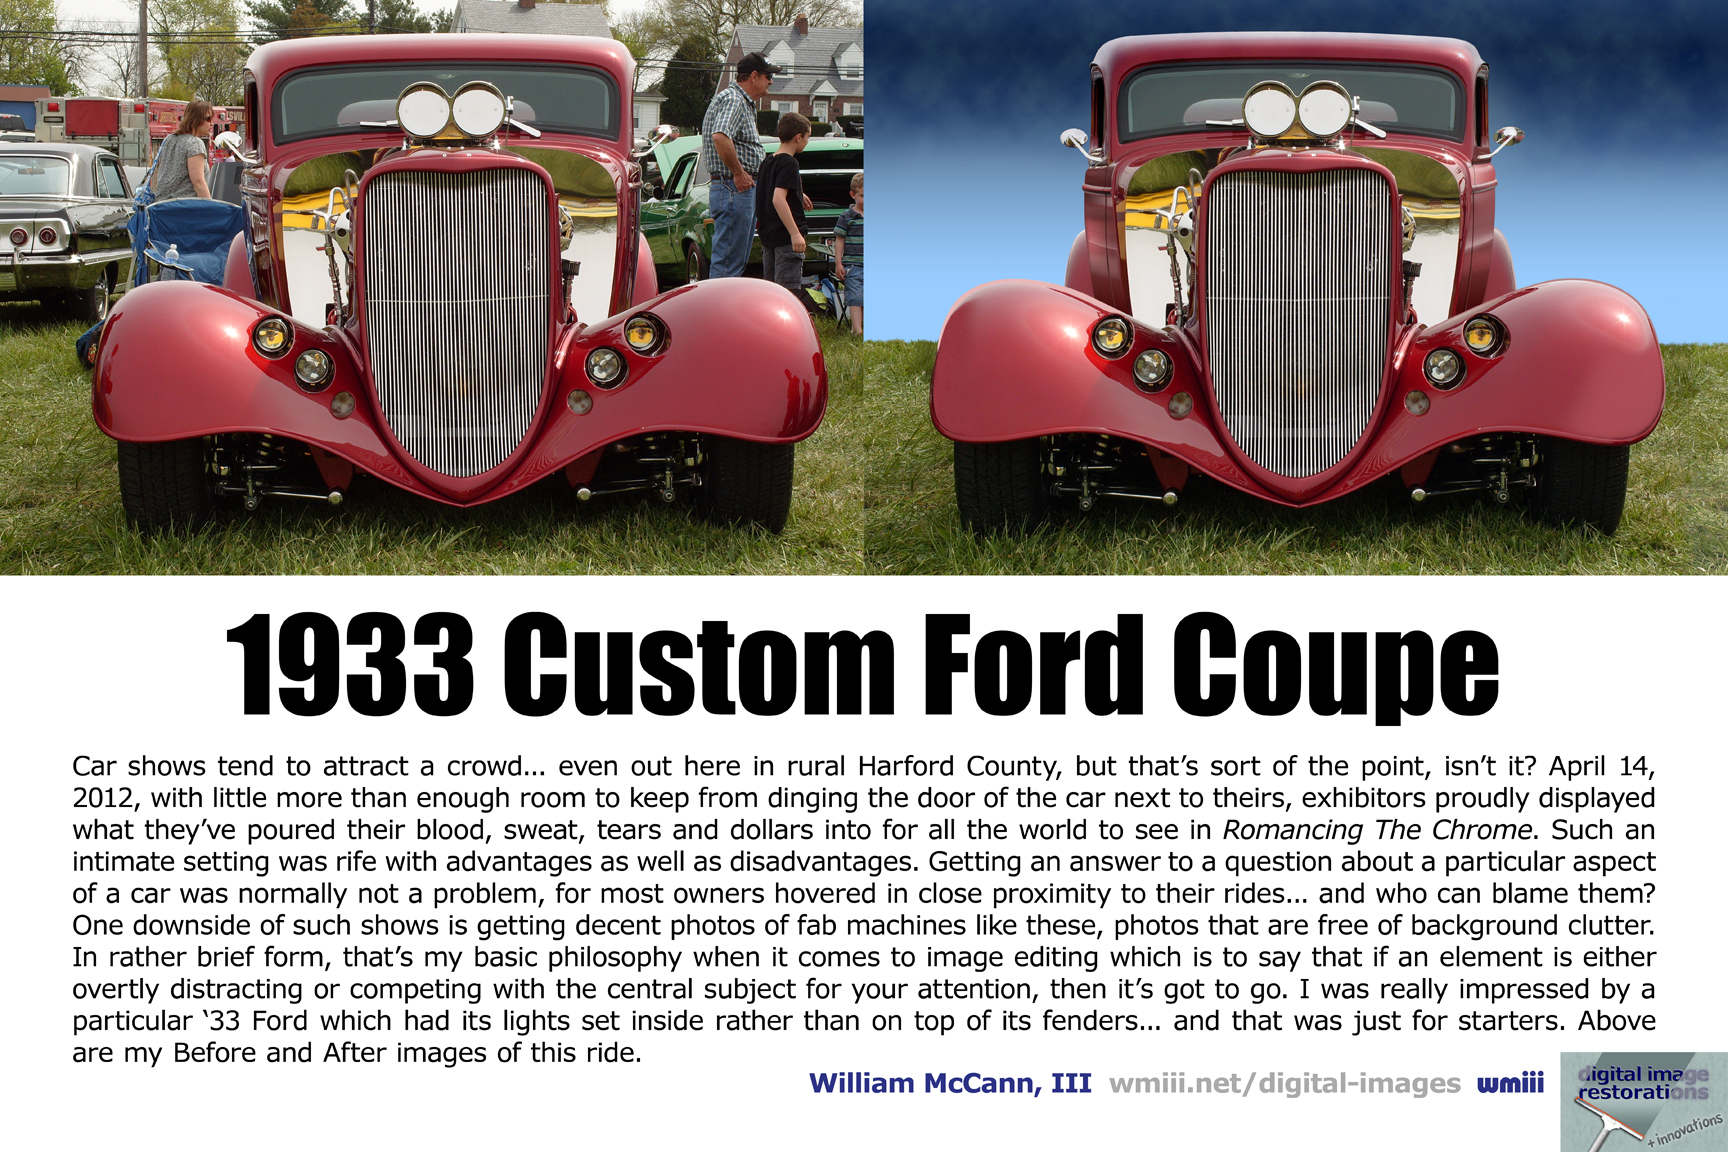 1933 Custom Ford Coupe